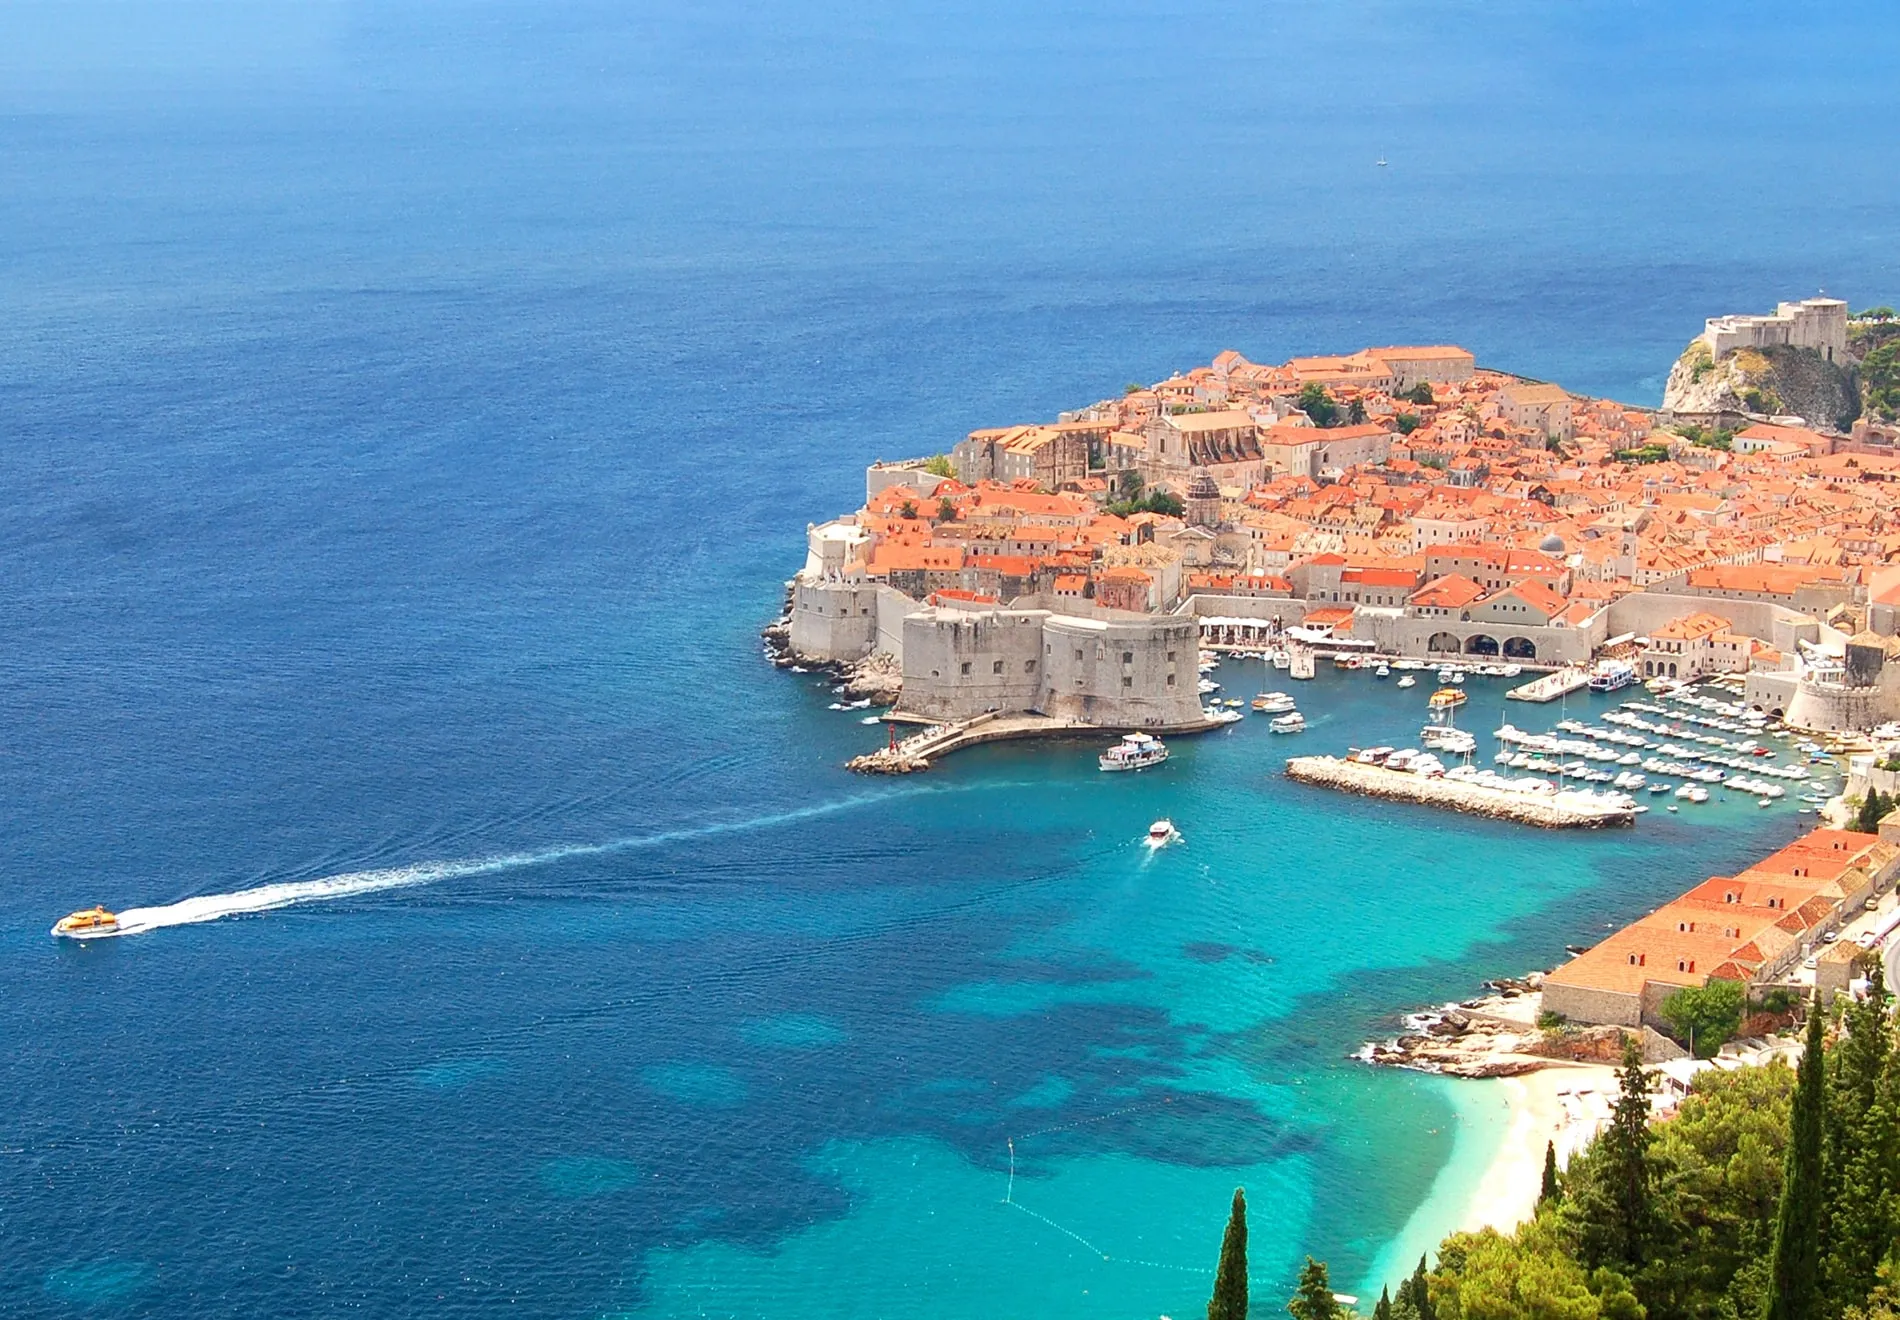 In Southern Dalmatia, experience the excitement of the Dubrovnik Summer Festival